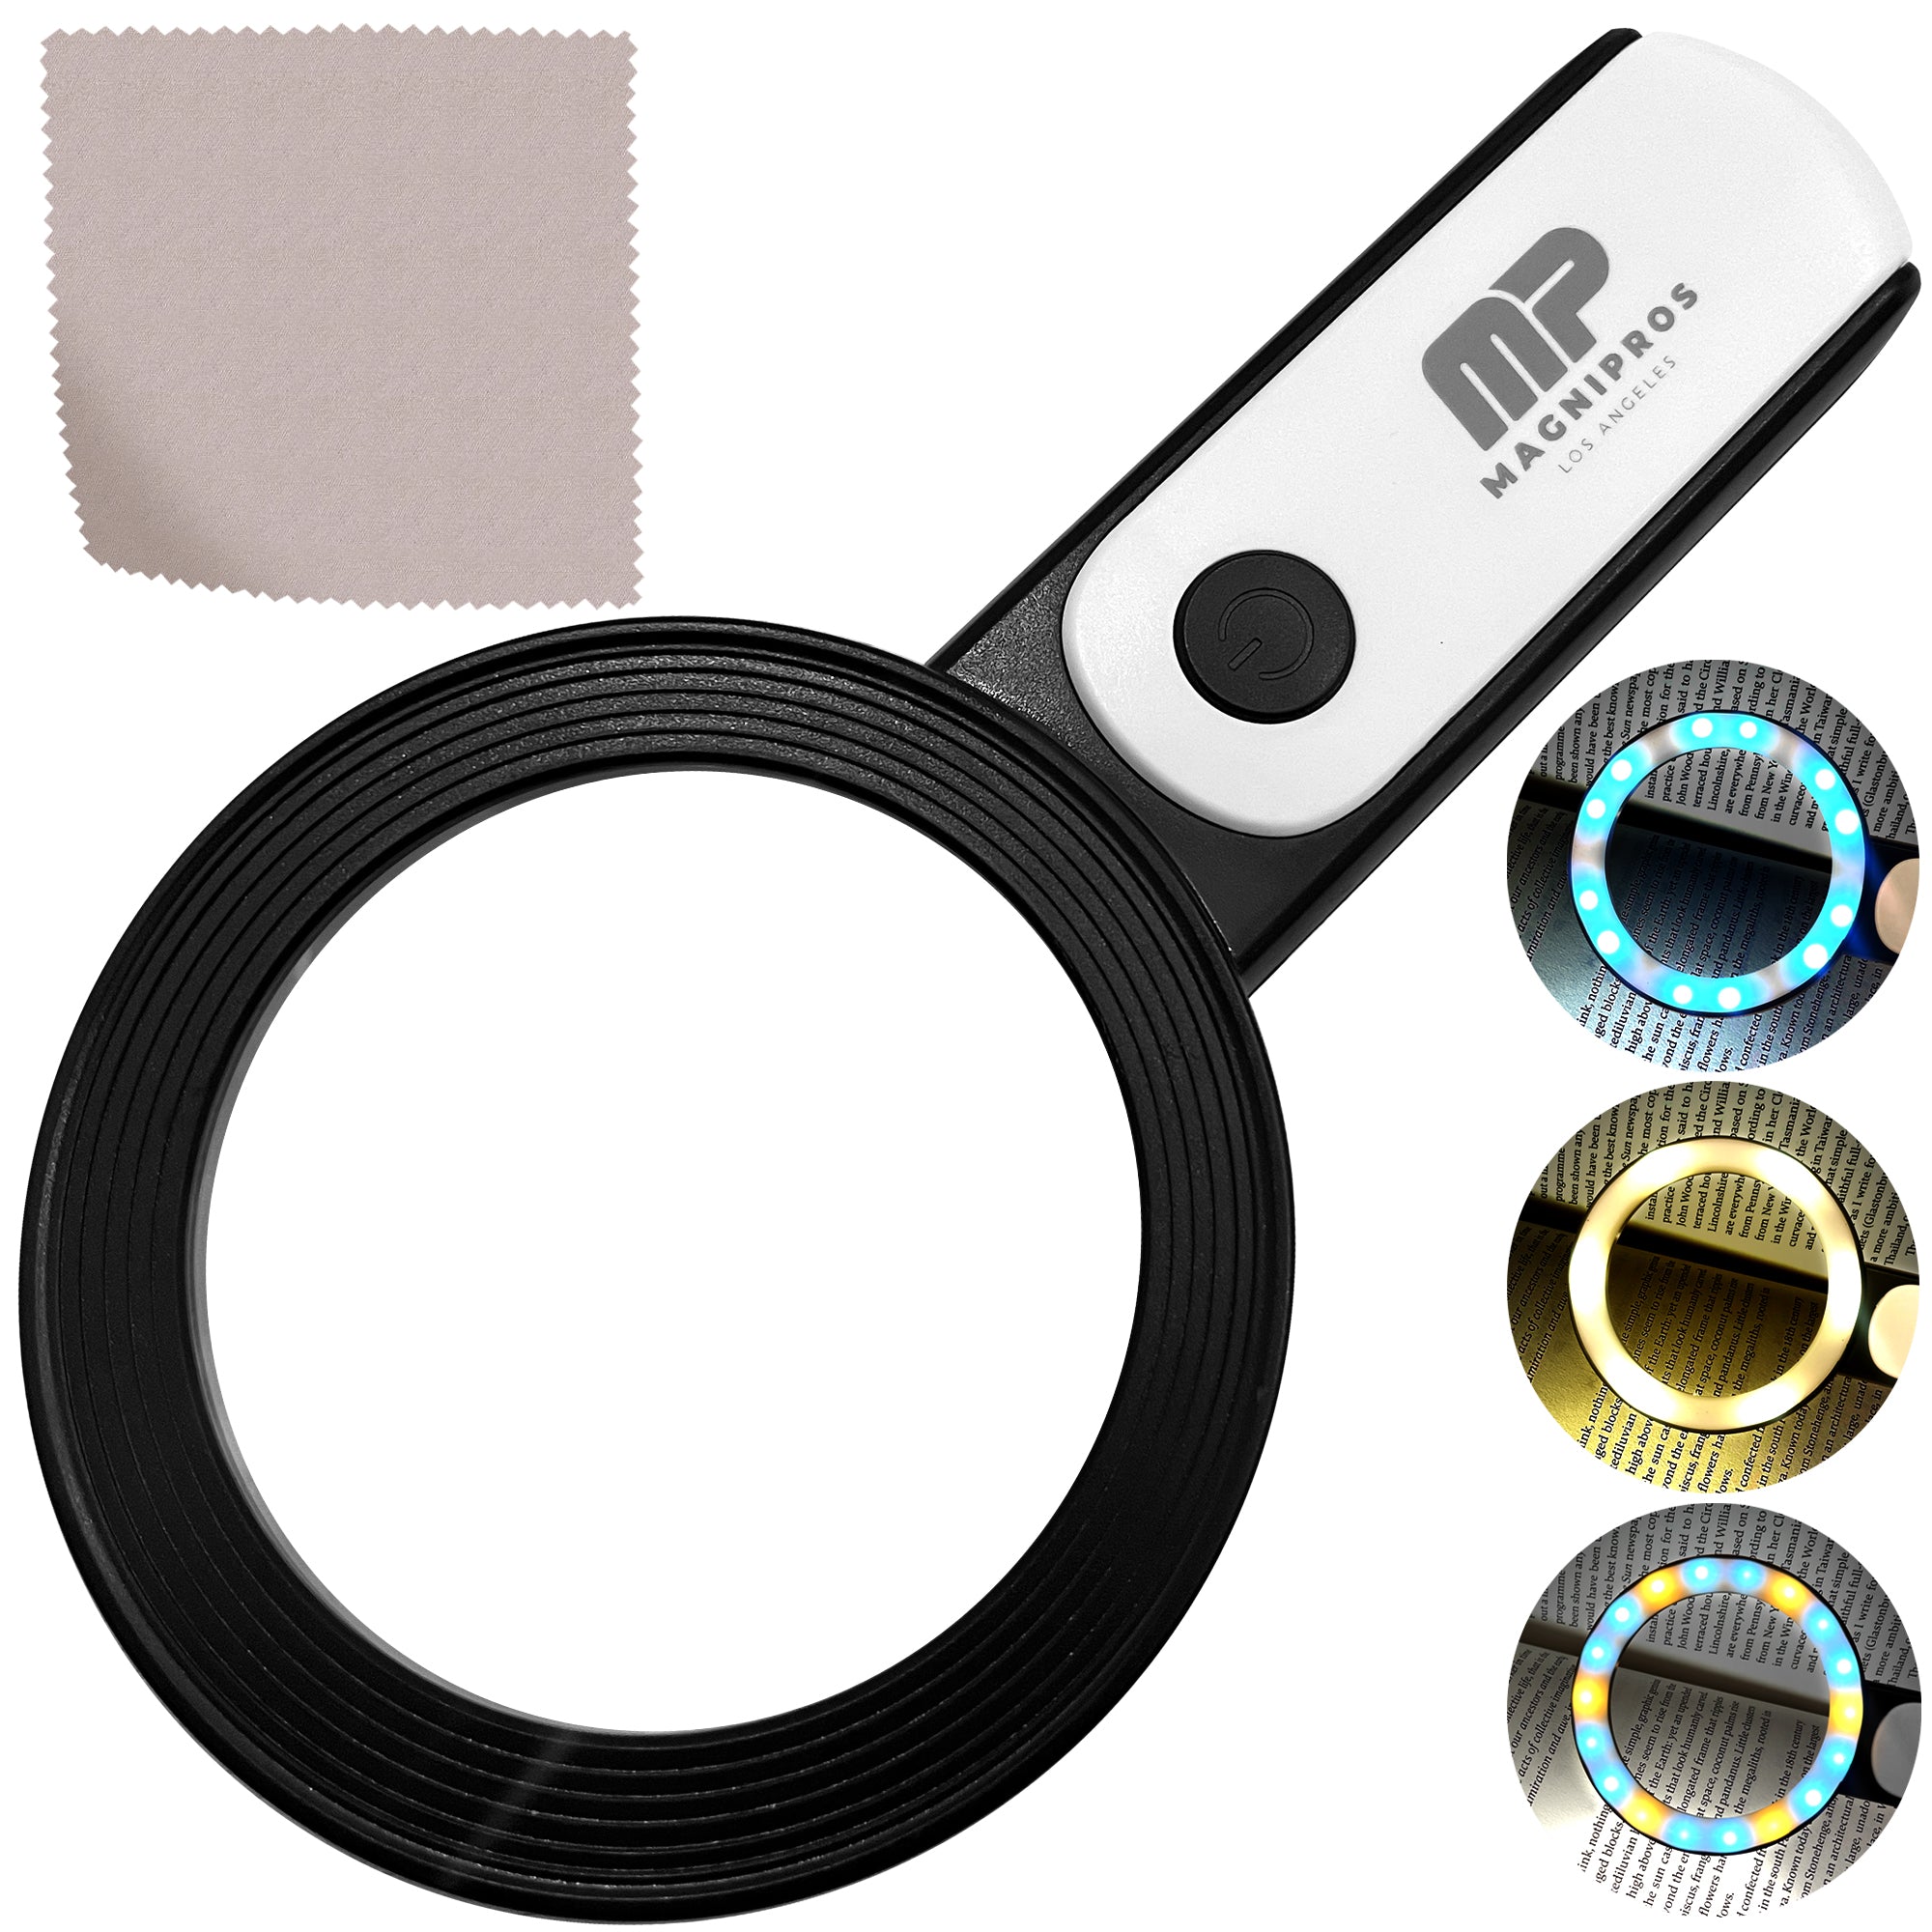 Hand Held 2.5X/5X Power Magnifying Glasses for Reading & Low Vision - China  Magnifier, Magnifying Glass